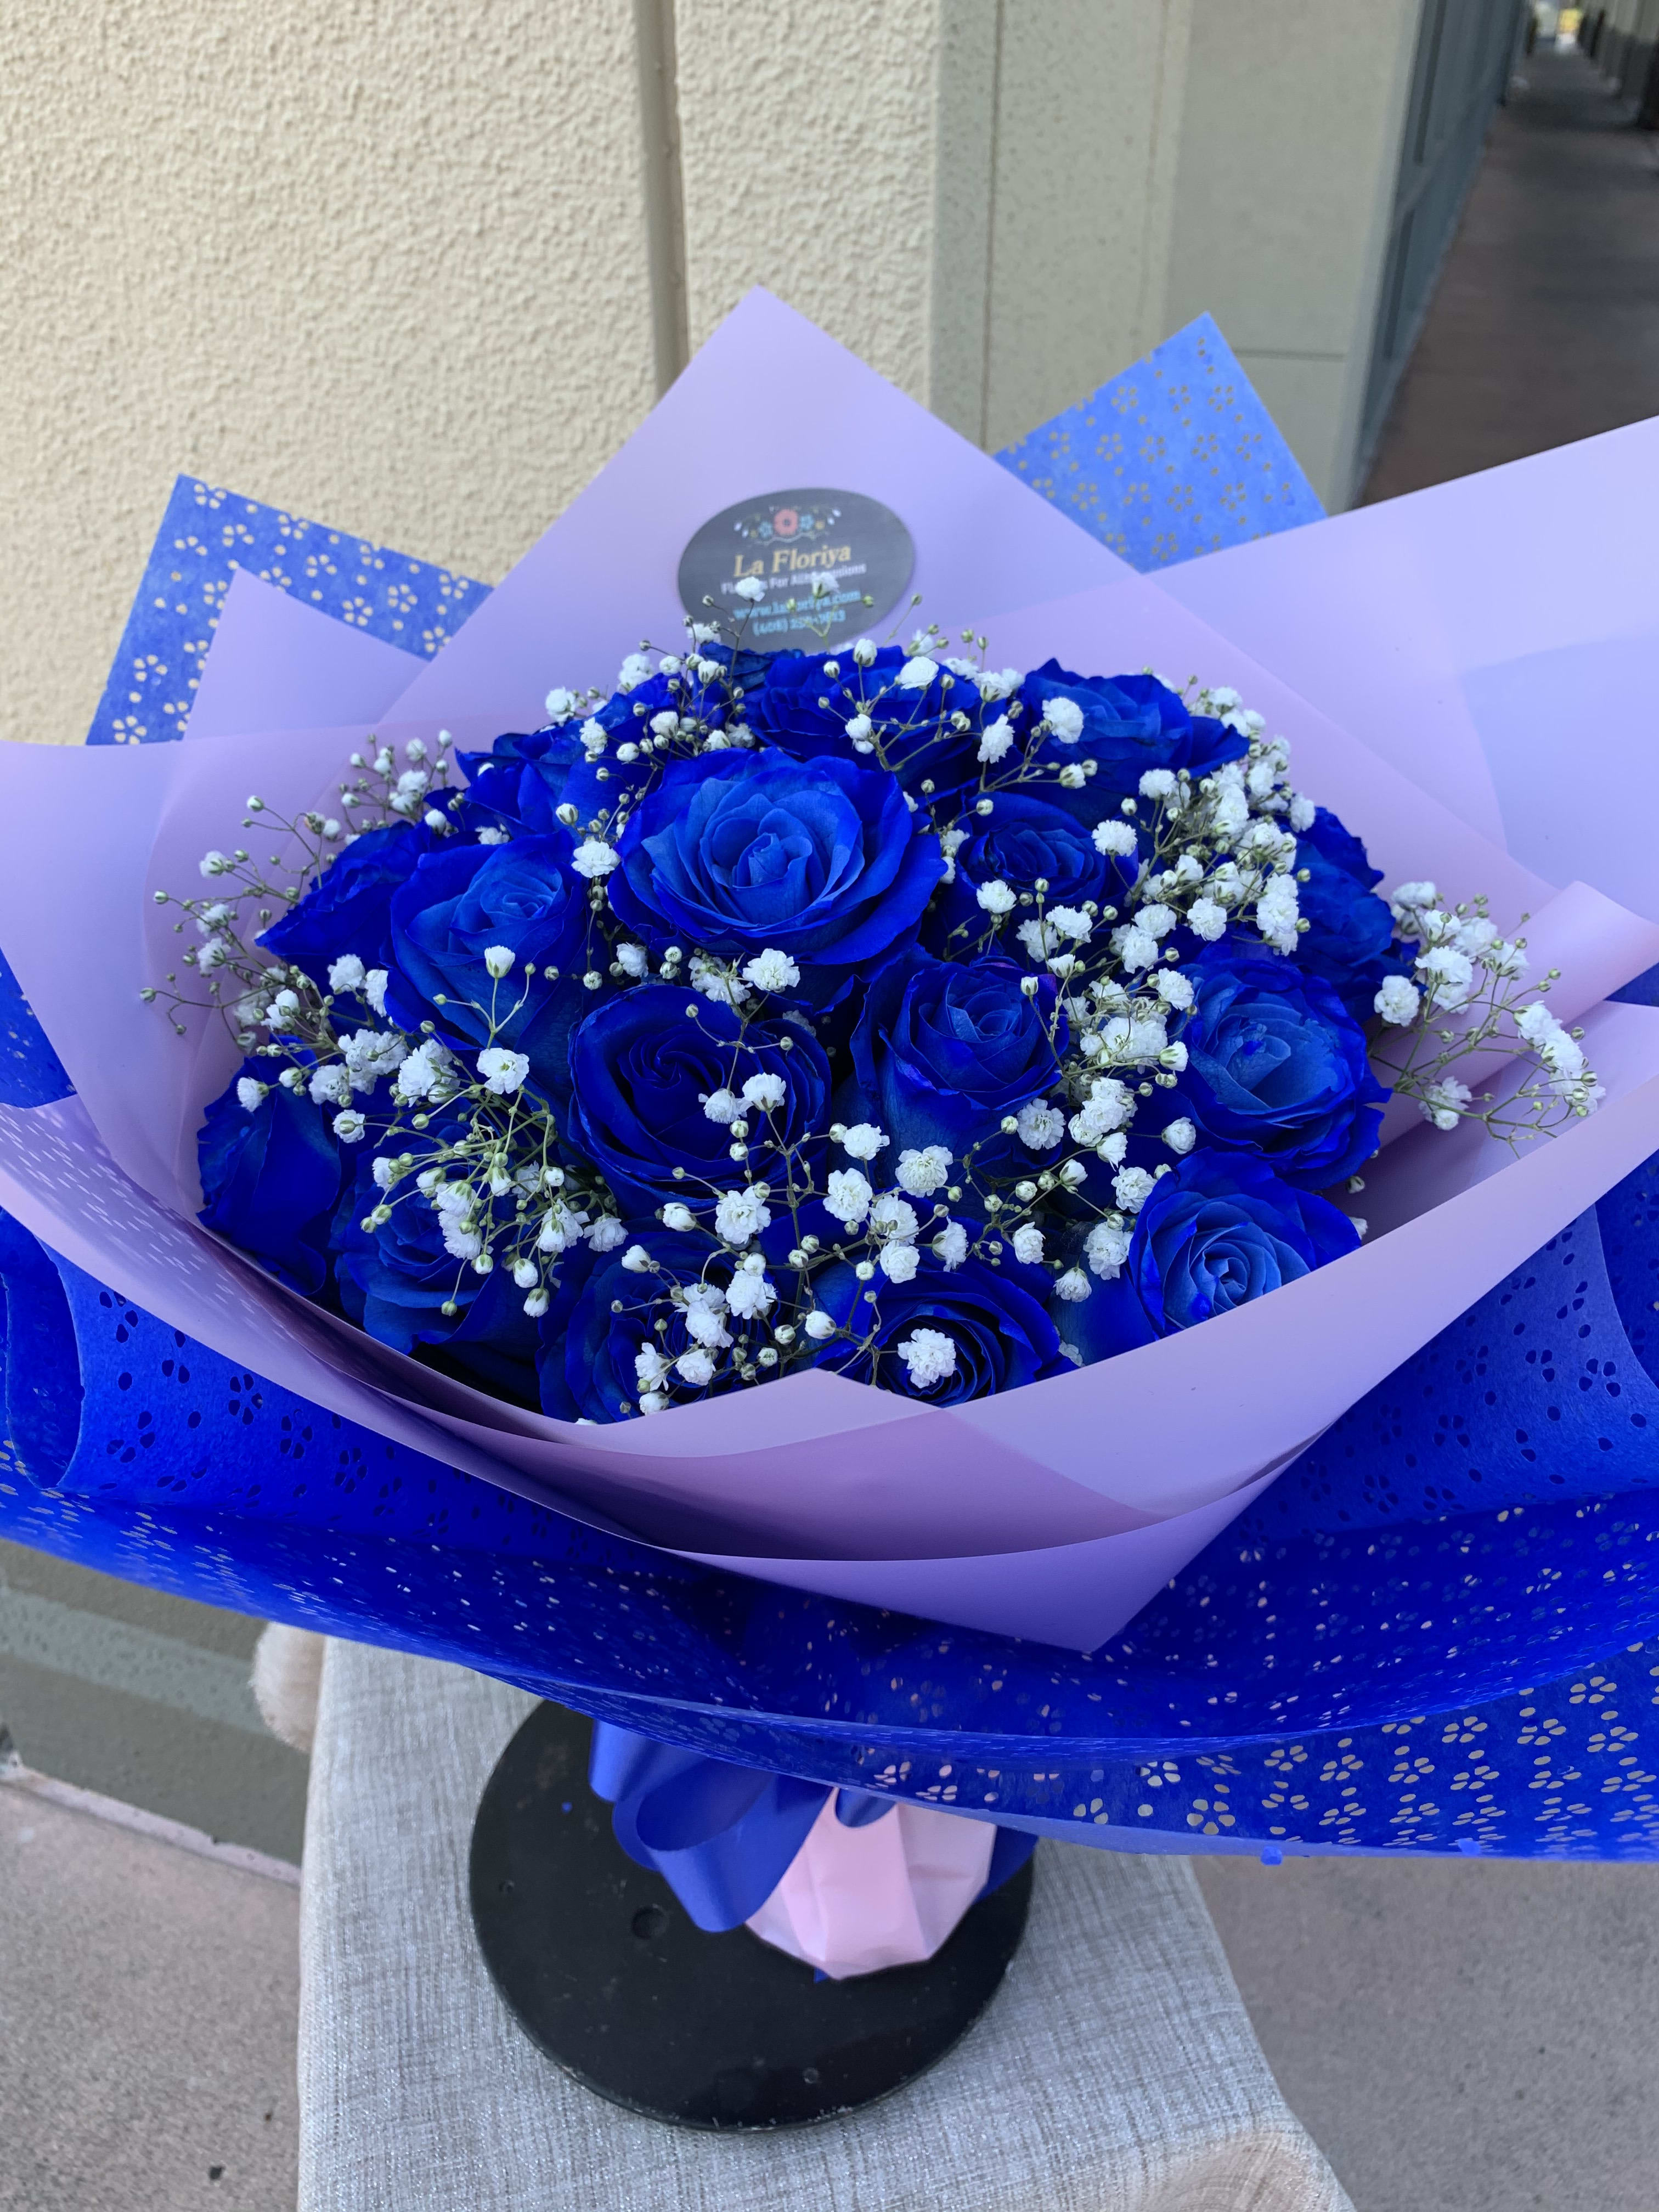 2 Dz. Blue Roses Wrapped Bouquet (PRE-ORDER ONLY) - 2 Dz. beautiful blue roses in a wrapped bouquet.  This bouquet must be PRE-ORDERED. No same day or next day delivery/pick-up.